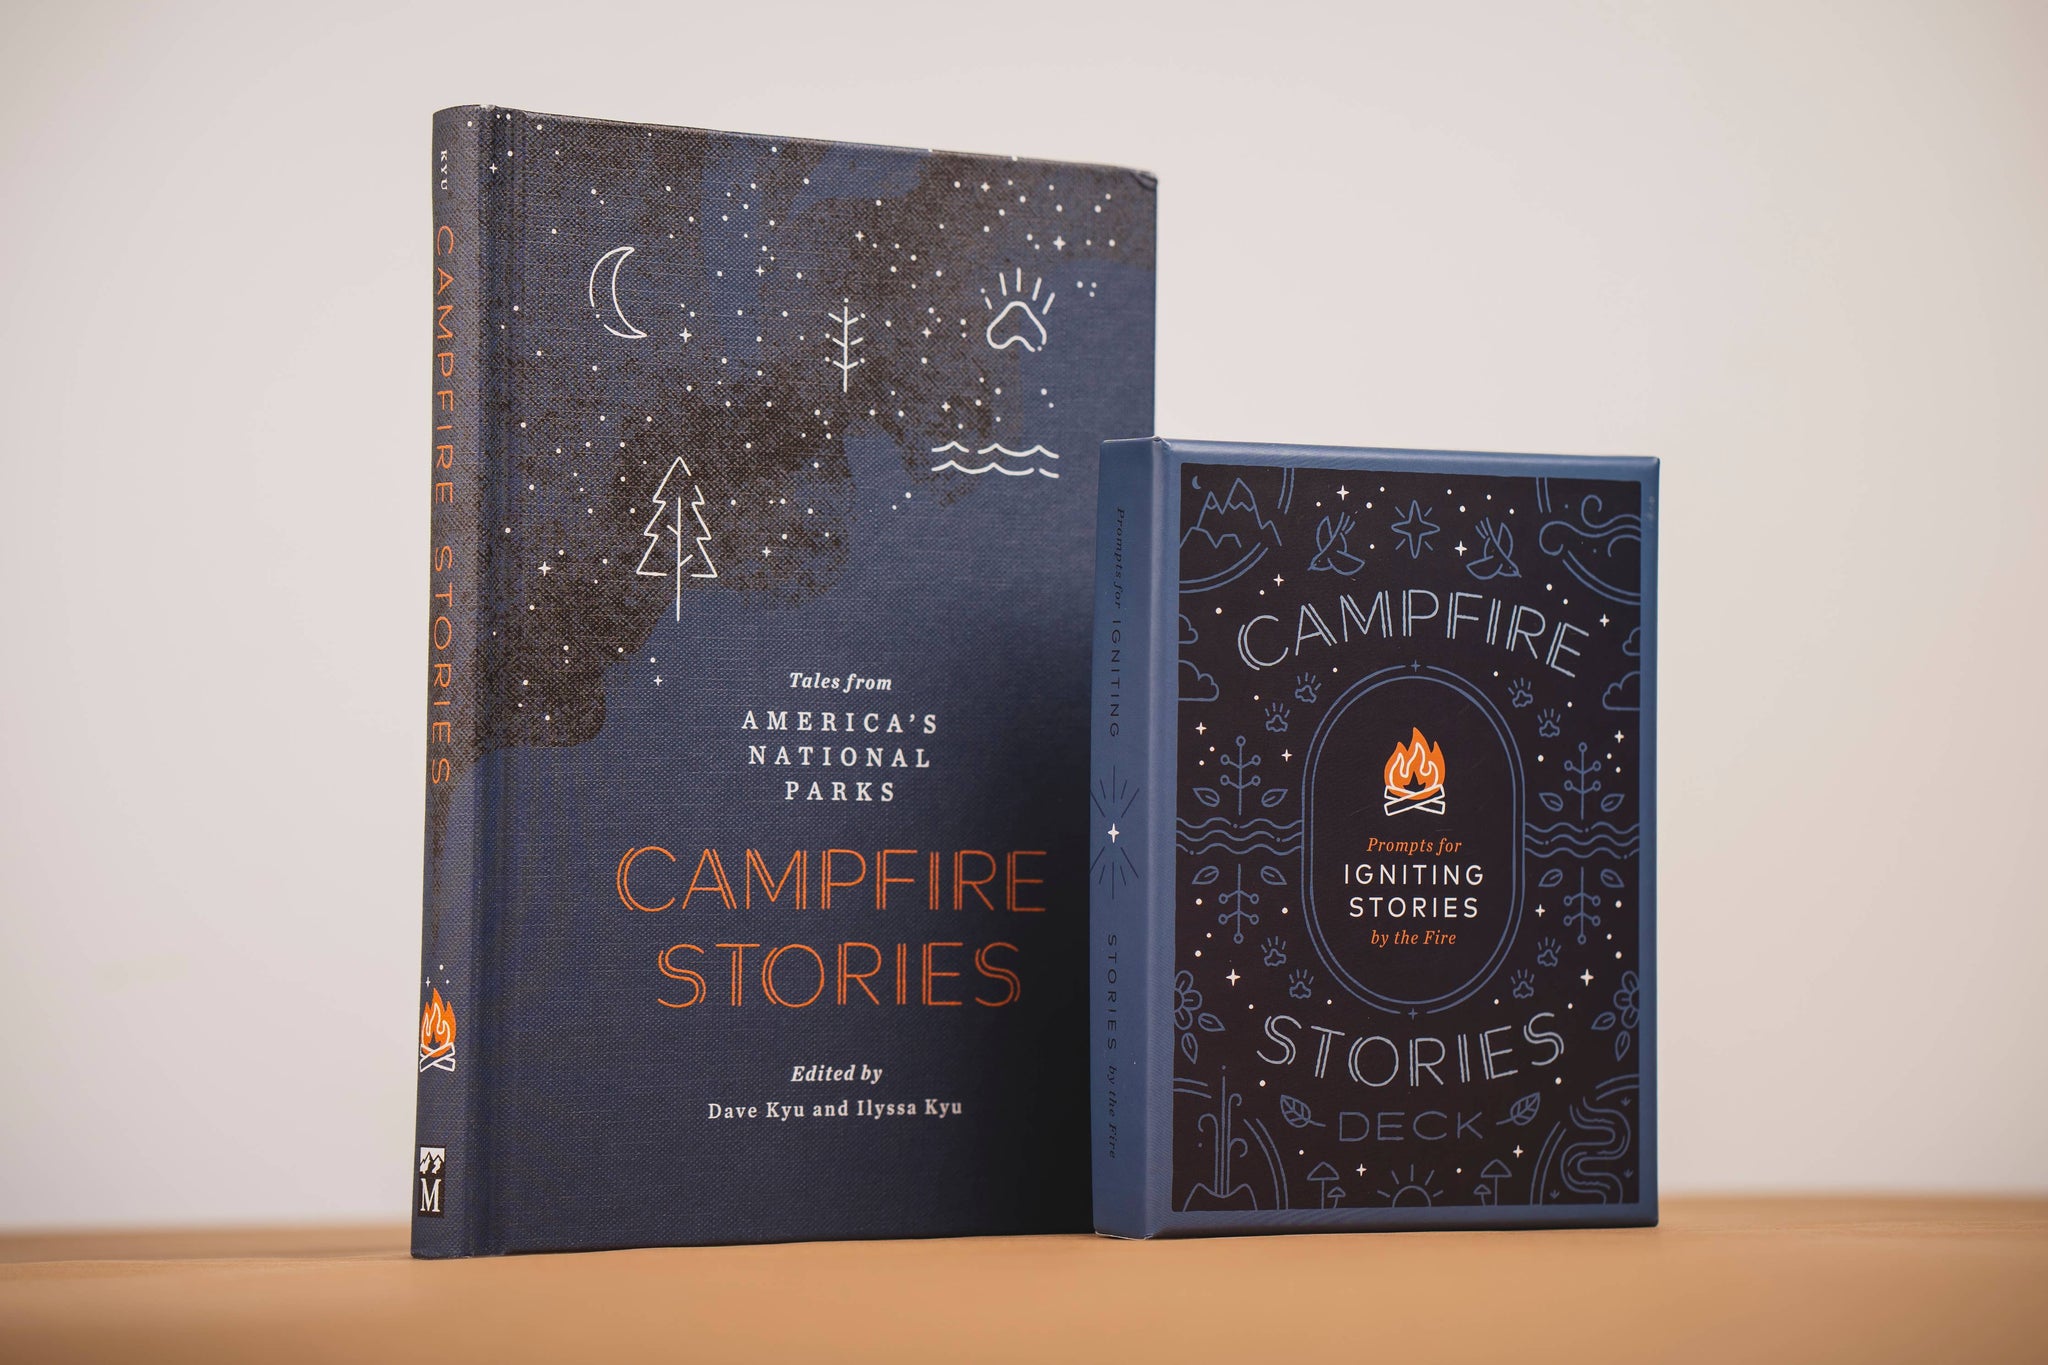 Mountaineers Books - Campfire Stories Deck Prompts for Igniting Stories